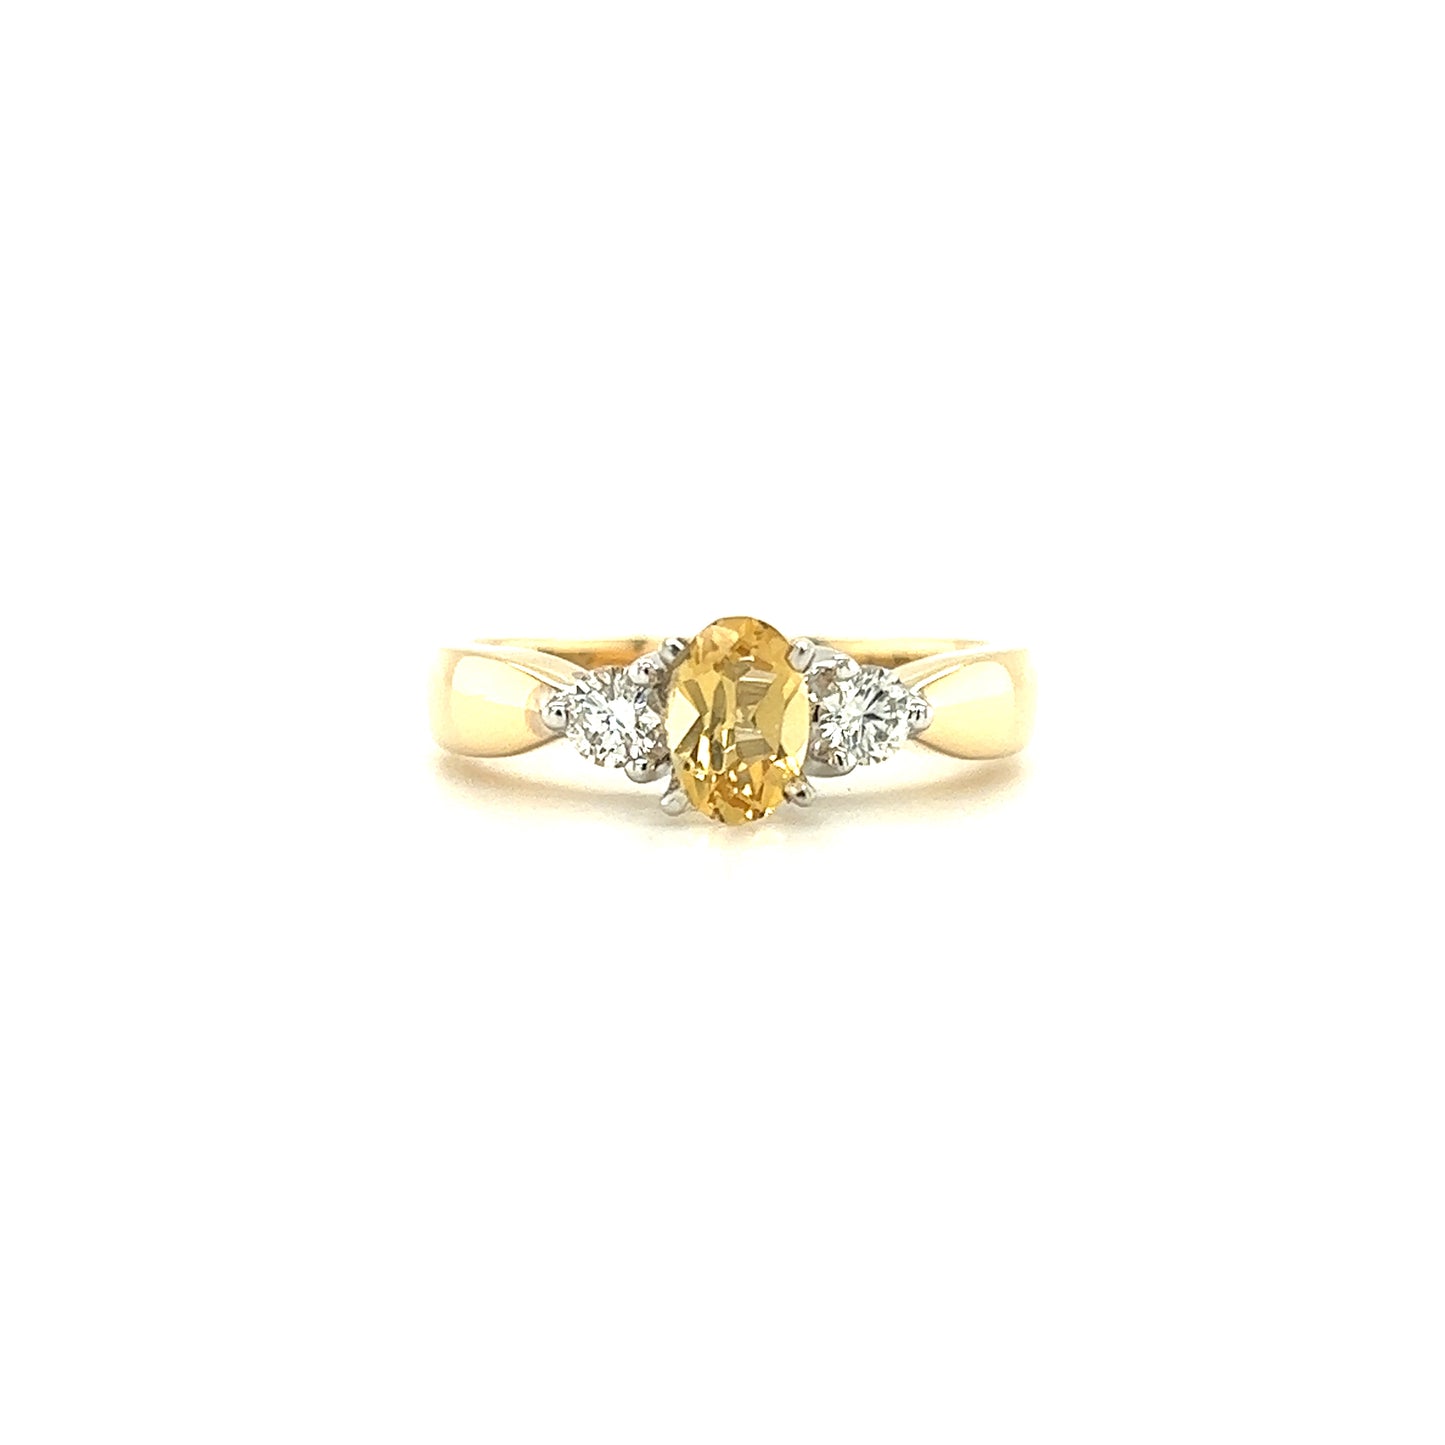 Precious Yellow Topaz Ring with Two Side Diamonds in 14K Yellow Gold